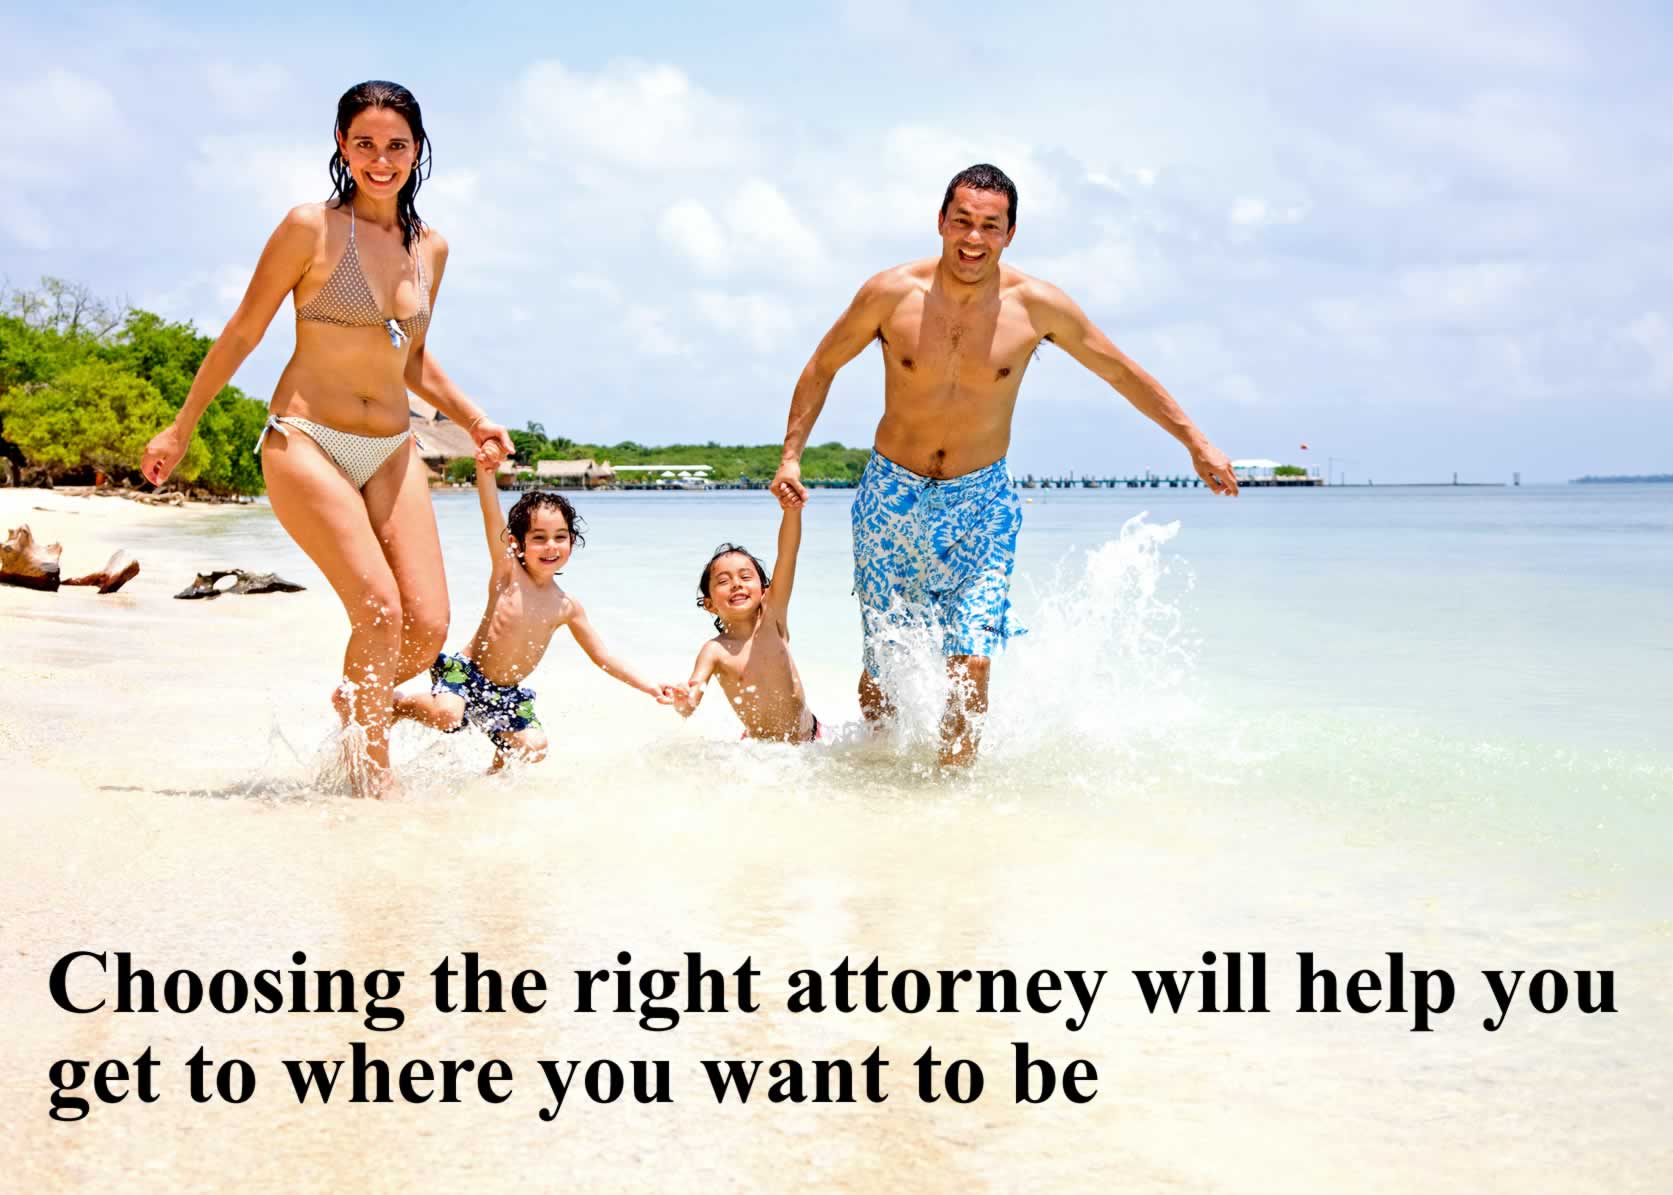 Choosing the right attorney will help you